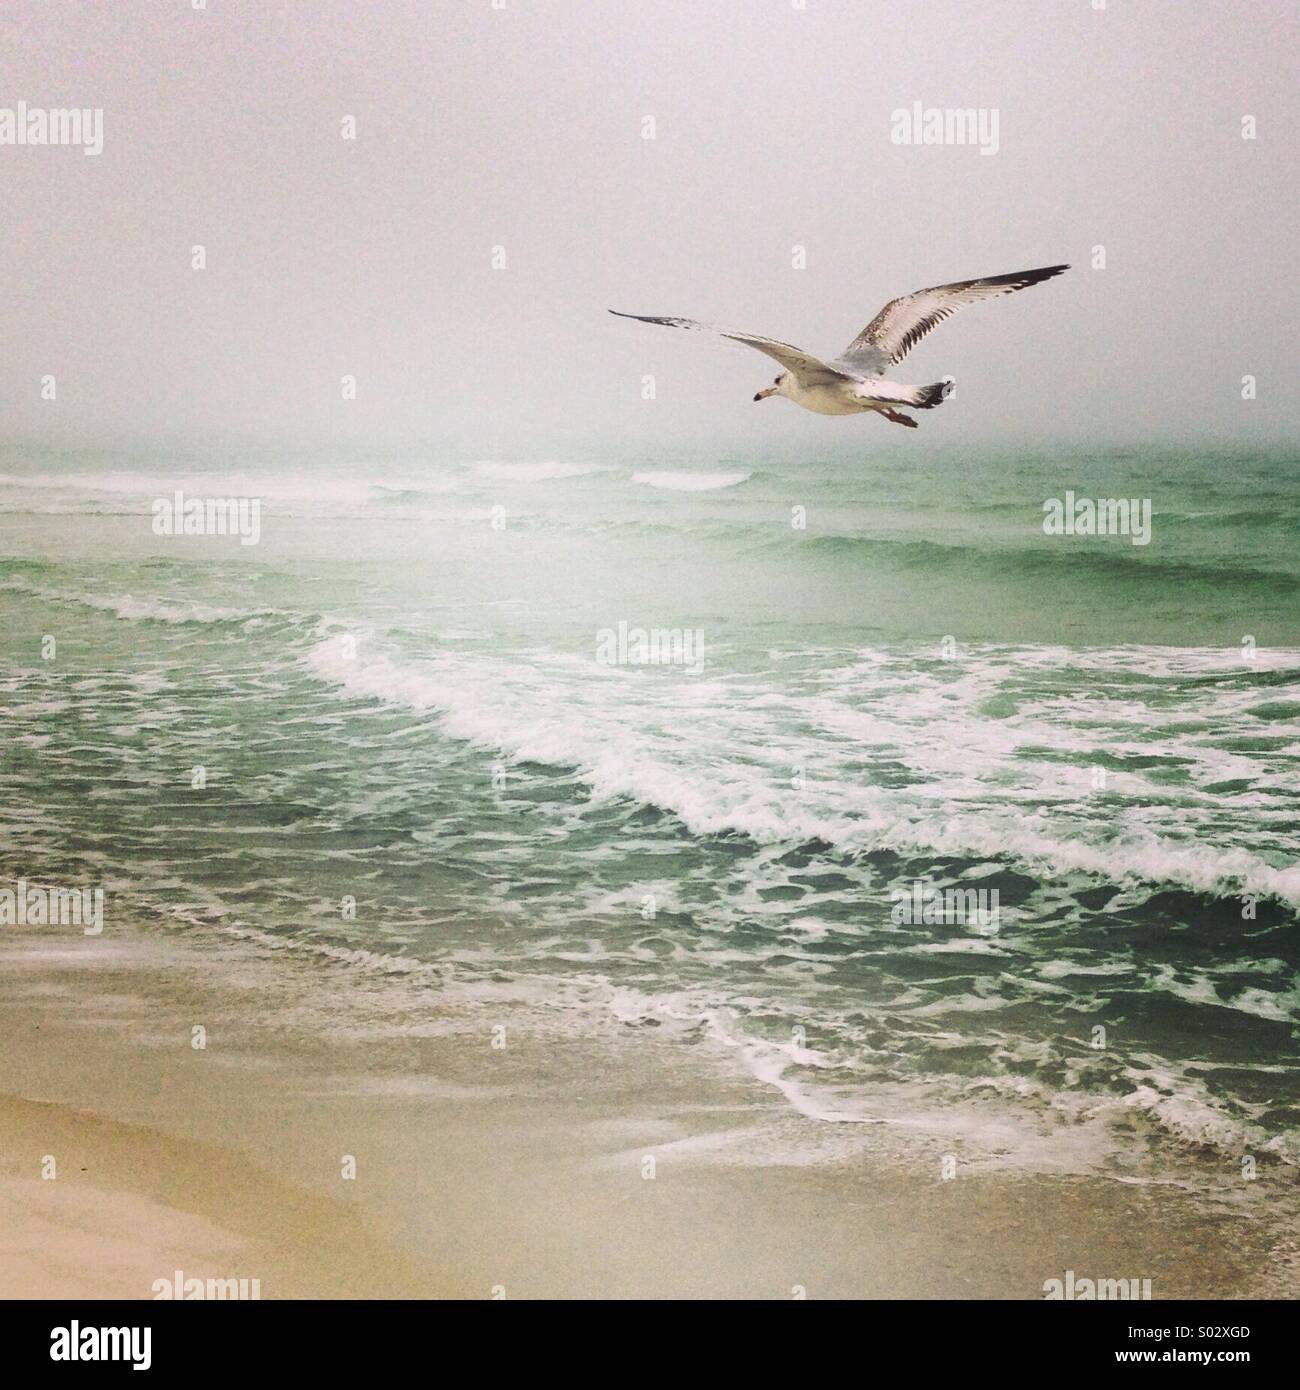 Seagull flying over stormy water. Stock Photo